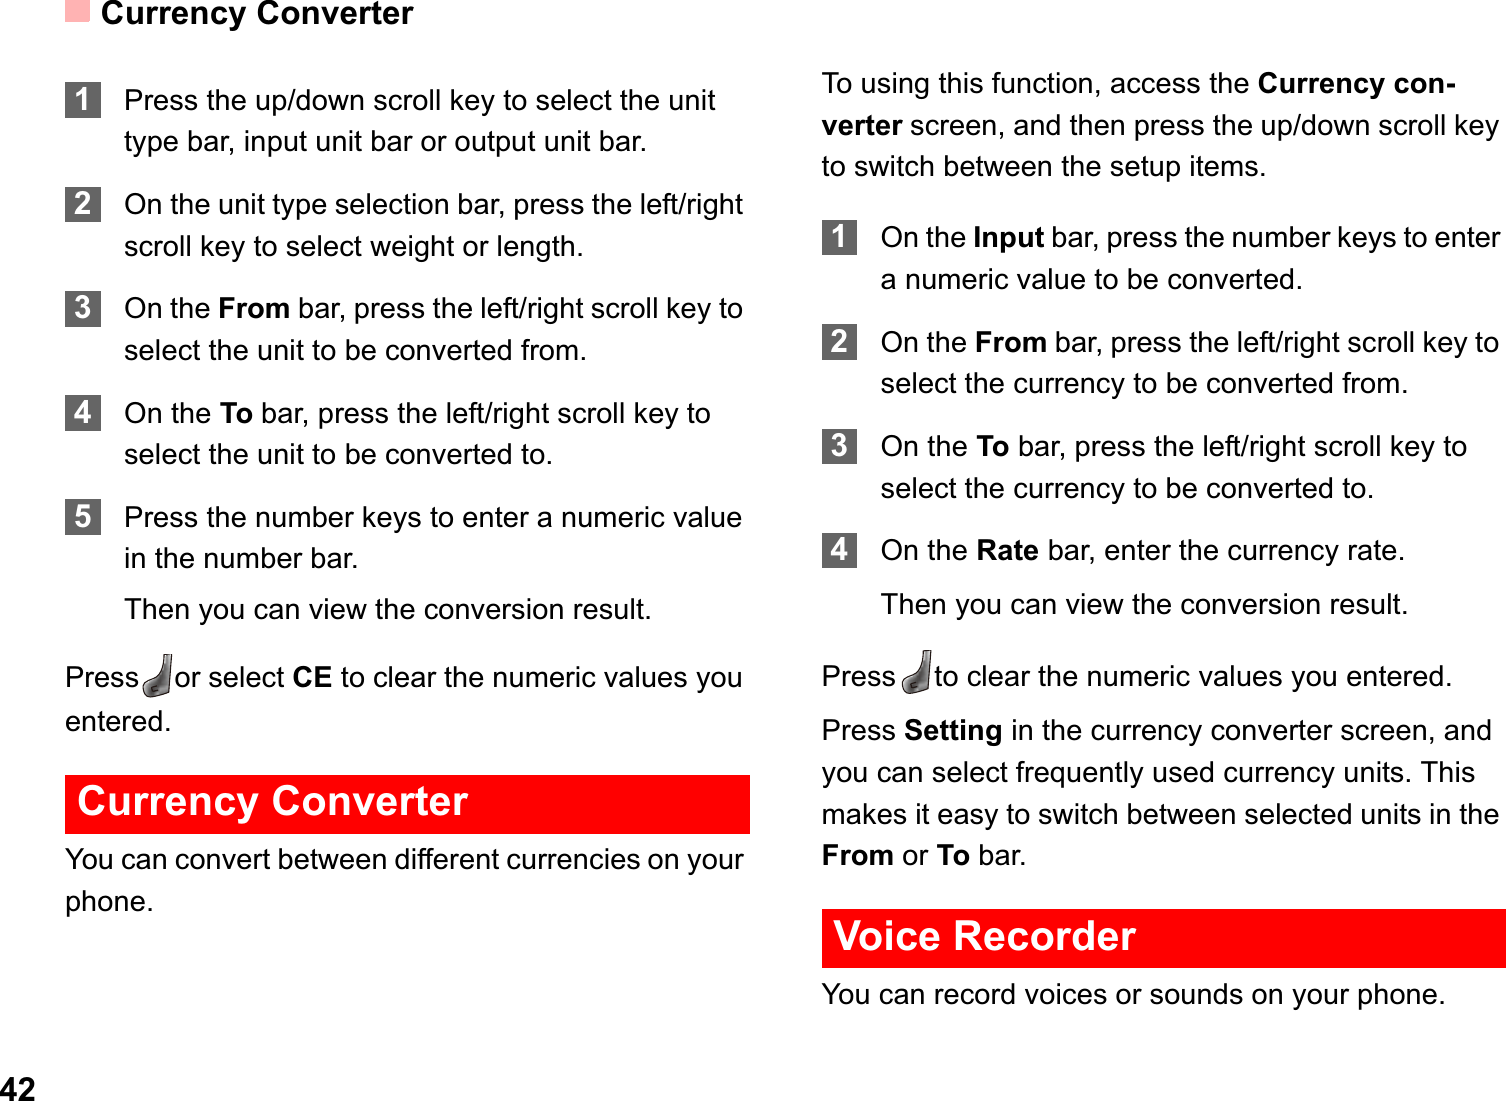 Currency Converter421Press the up/down scroll key to select the unit type bar, input unit bar or output unit bar.2On the unit type selection bar, press the left/right scroll key to select weight or length.3On the From bar, press the left/right scroll key to select the unit to be converted from.4On the To bar, press the left/right scroll key to select the unit to be converted to.5Press the number keys to enter a numeric value in the number bar. Then you can view the conversion result.Press or select CE to clear the numeric values you entered.Currency ConverterYou can convert between different currencies on your phone.To using this function, access the Currency con-verter screen, and then press the up/down scroll key to switch between the setup items.1On the Input bar, press the number keys to enter a numeric value to be converted.2On the From bar, press the left/right scroll key to select the currency to be converted from.3On the To bar, press the left/right scroll key to select the currency to be converted to.4On the Rate bar, enter the currency rate.Then you can view the conversion result.Press to clear the numeric values you entered.Press Setting in the currency converter screen, and you can select frequently used currency units. This makes it easy to switch between selected units in the From or To bar.Voice RecorderYou can record voices or sounds on your phone.  